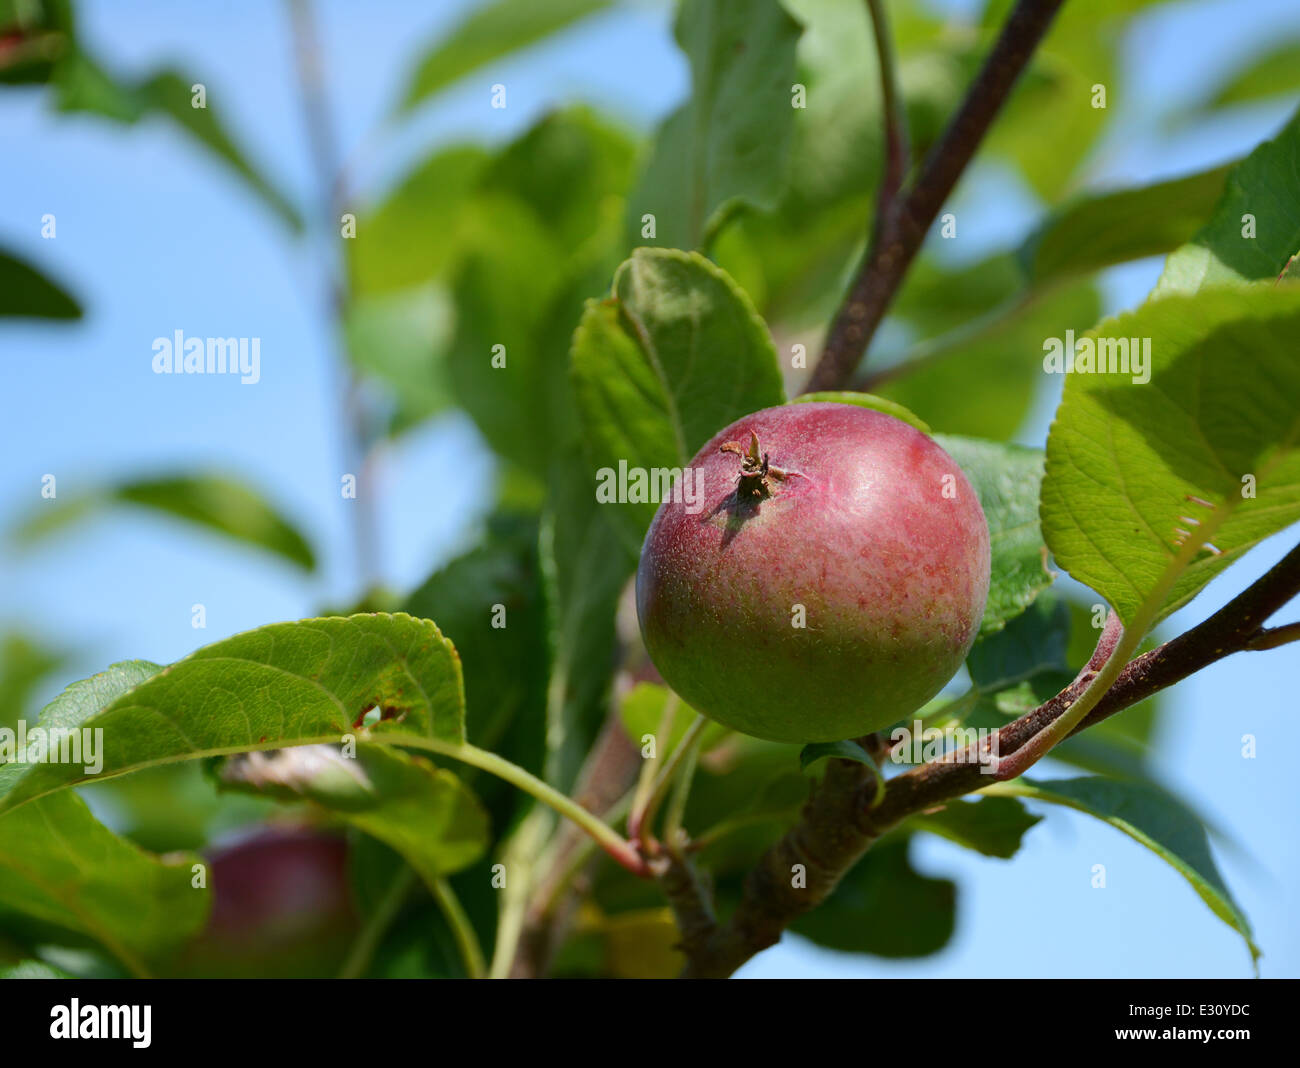 Close-up of a small red and green apple on the tree branch Stock Photo